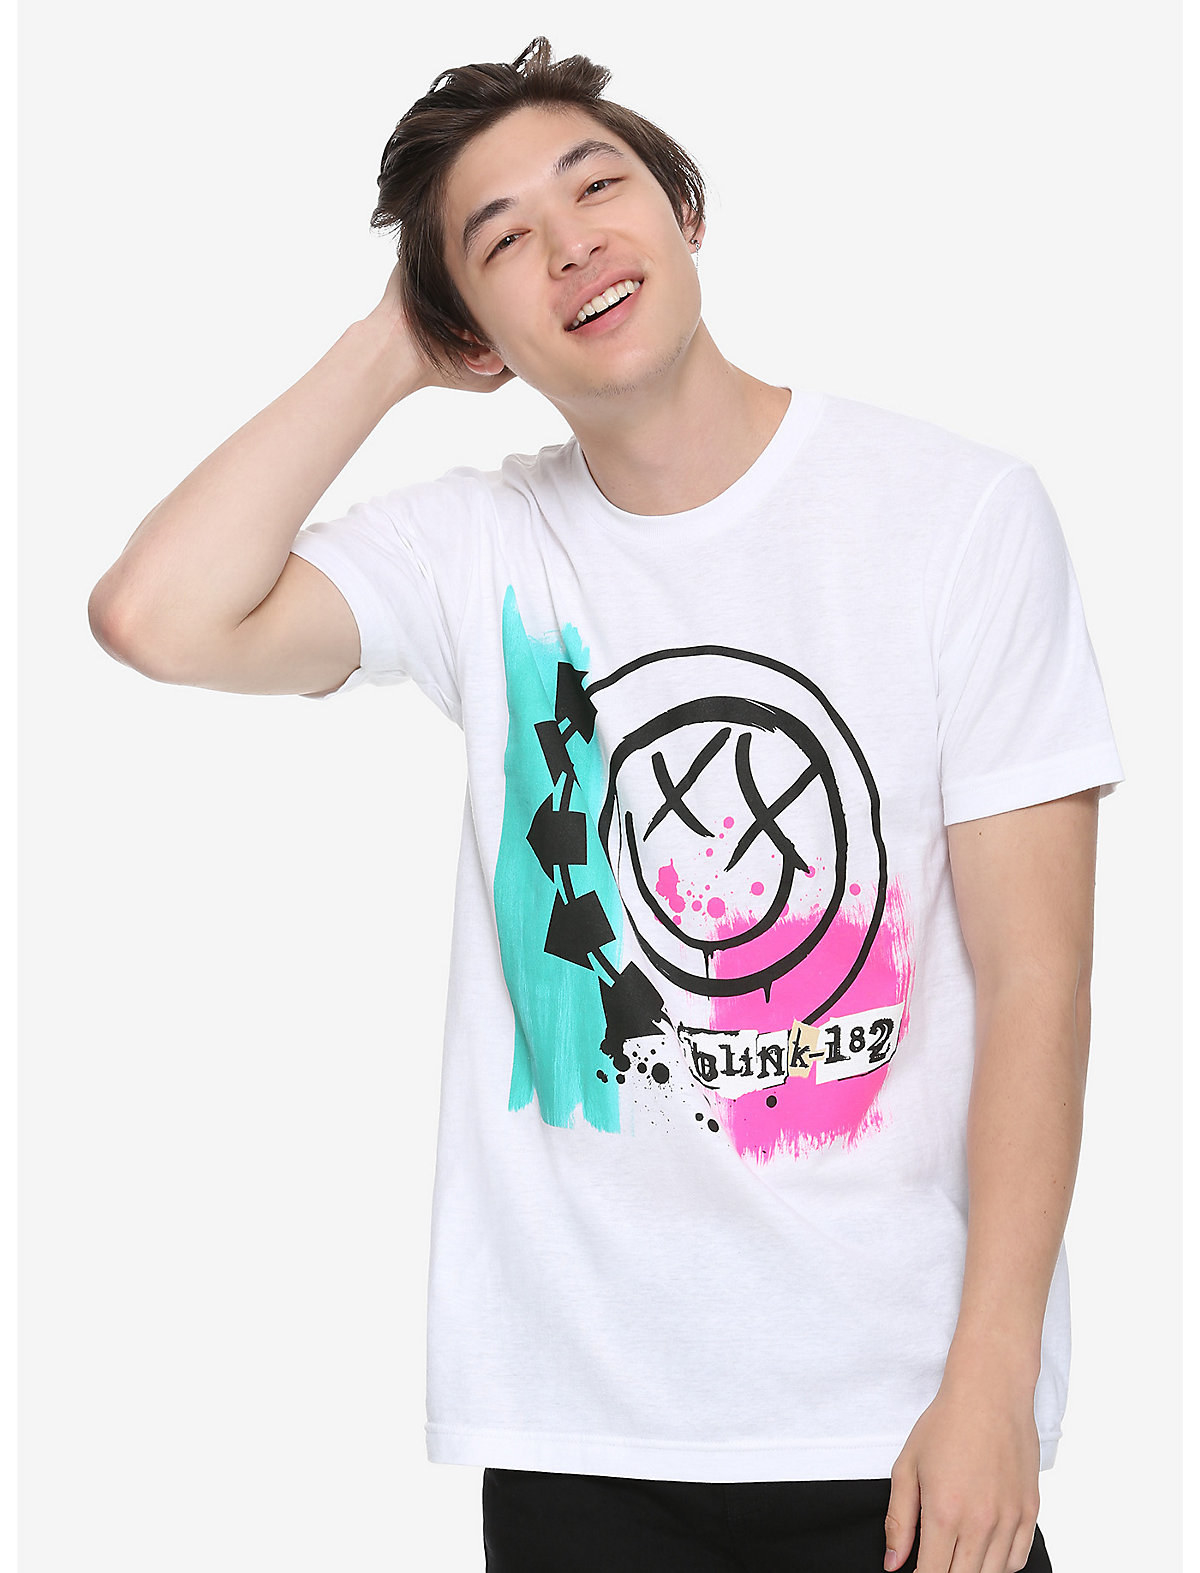 a model in a white tee with the blink-182 logo on it